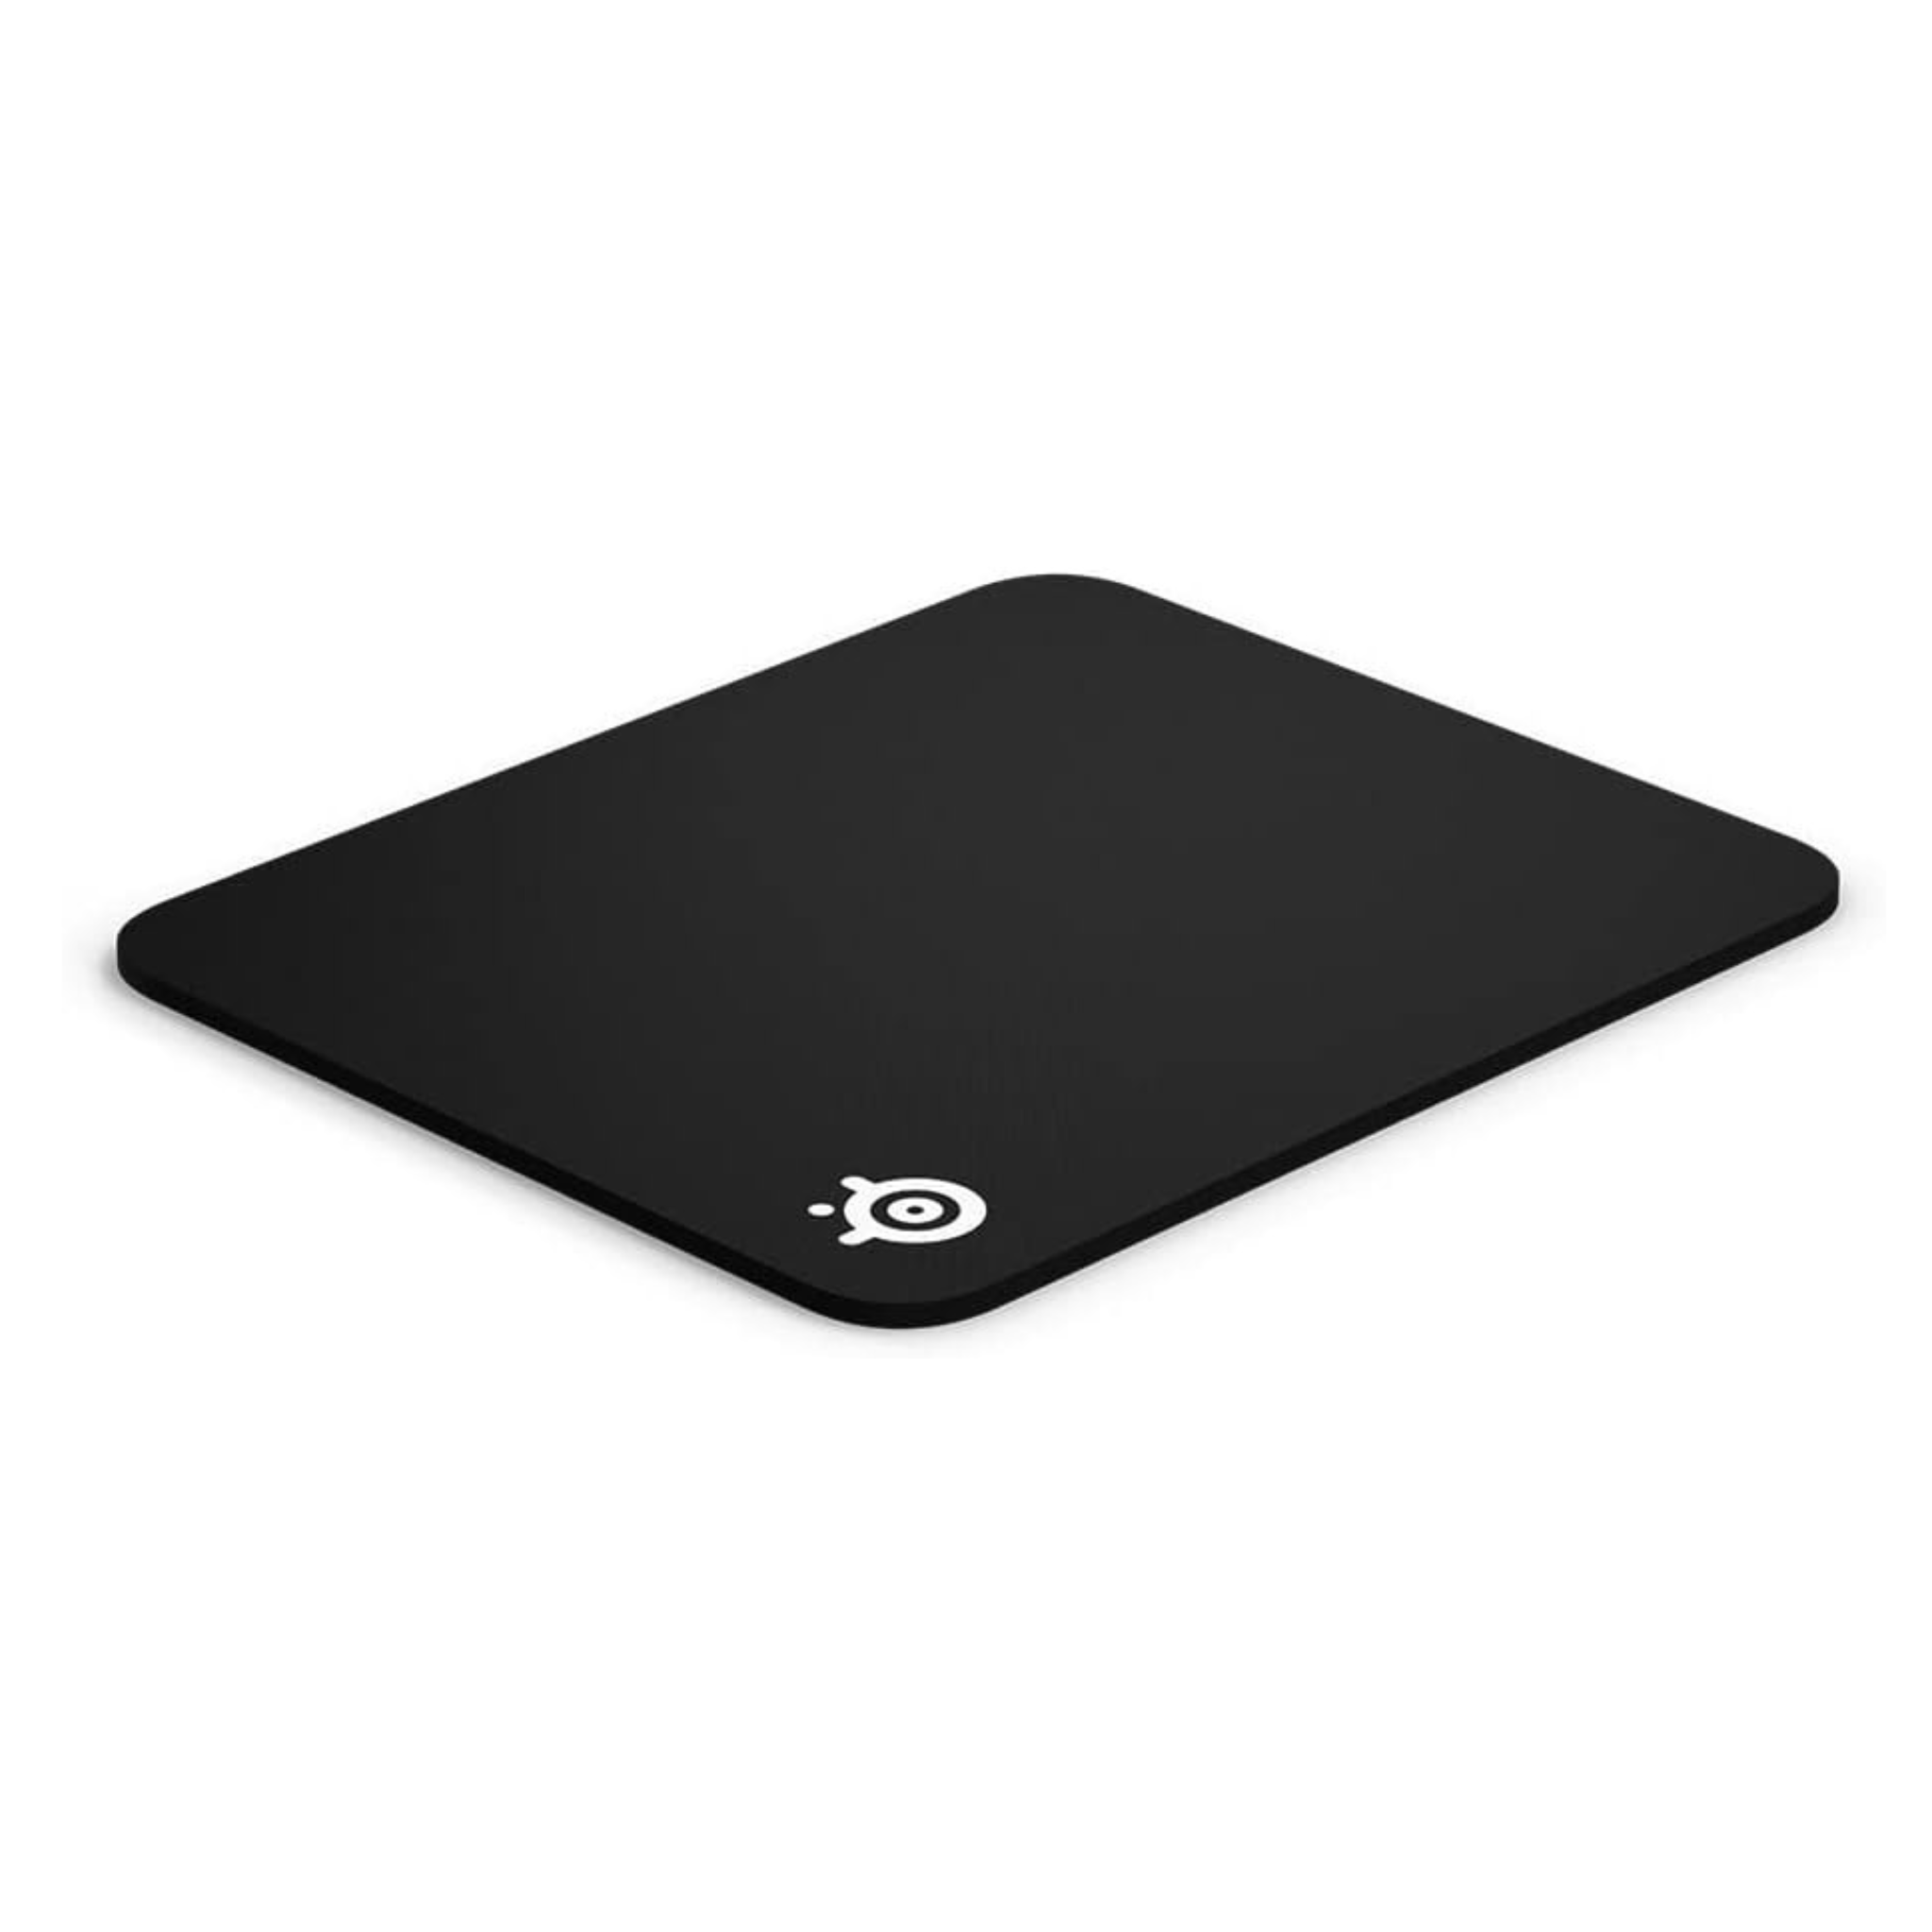 SteelSeries QcK Heavy Cloth Gaming Mouse Pad